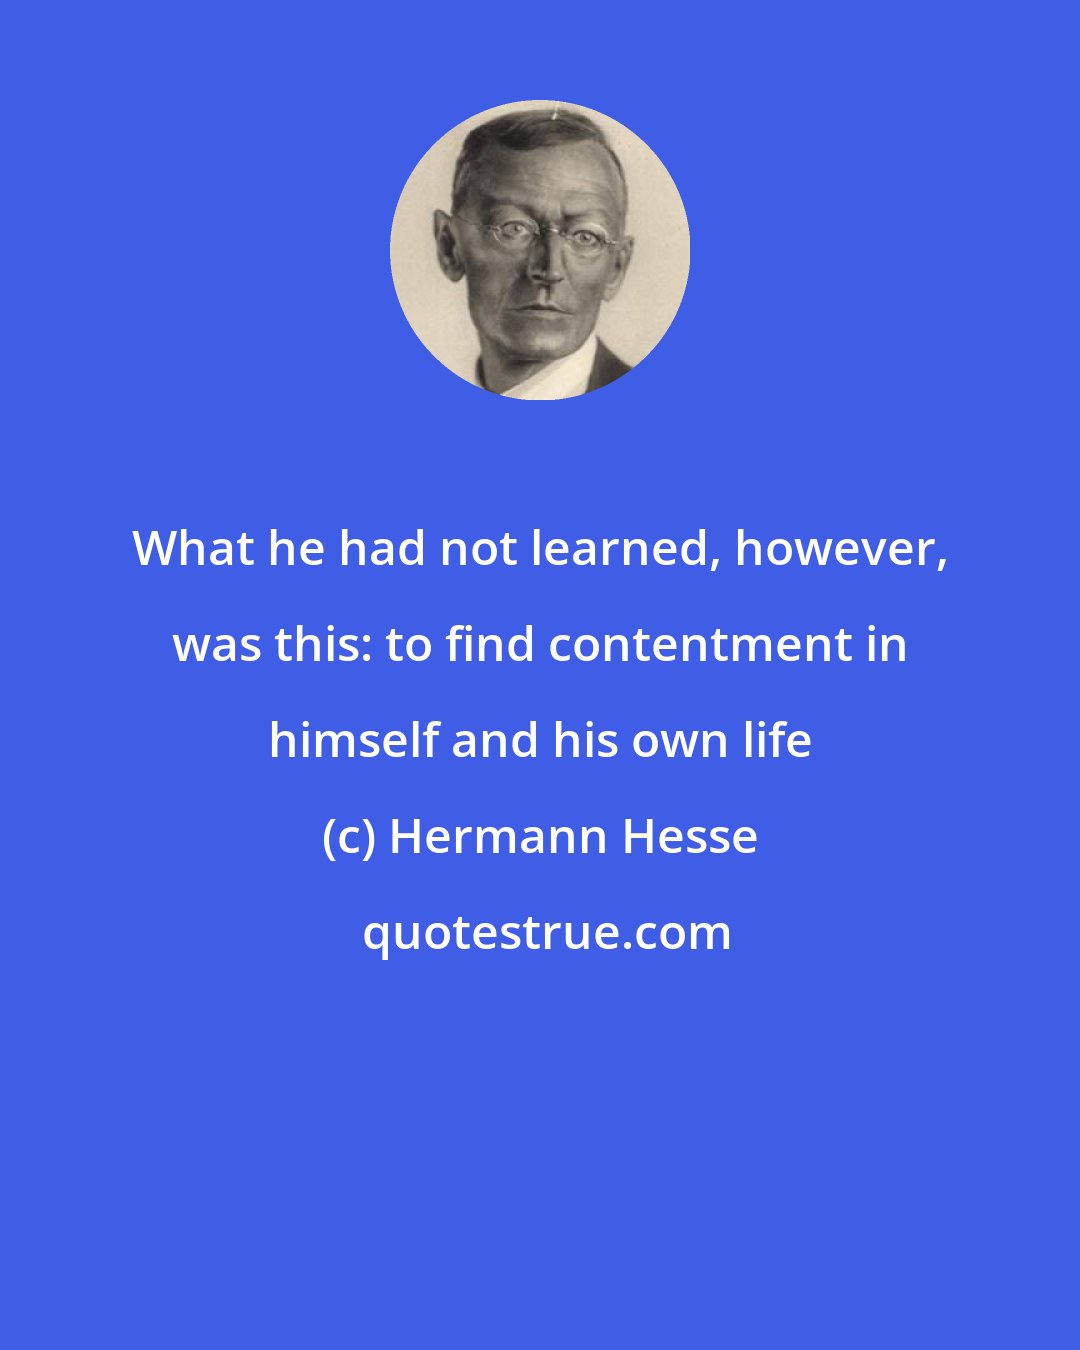 Hermann Hesse: What he had not learned, however, was this: to find contentment in himself and his own life